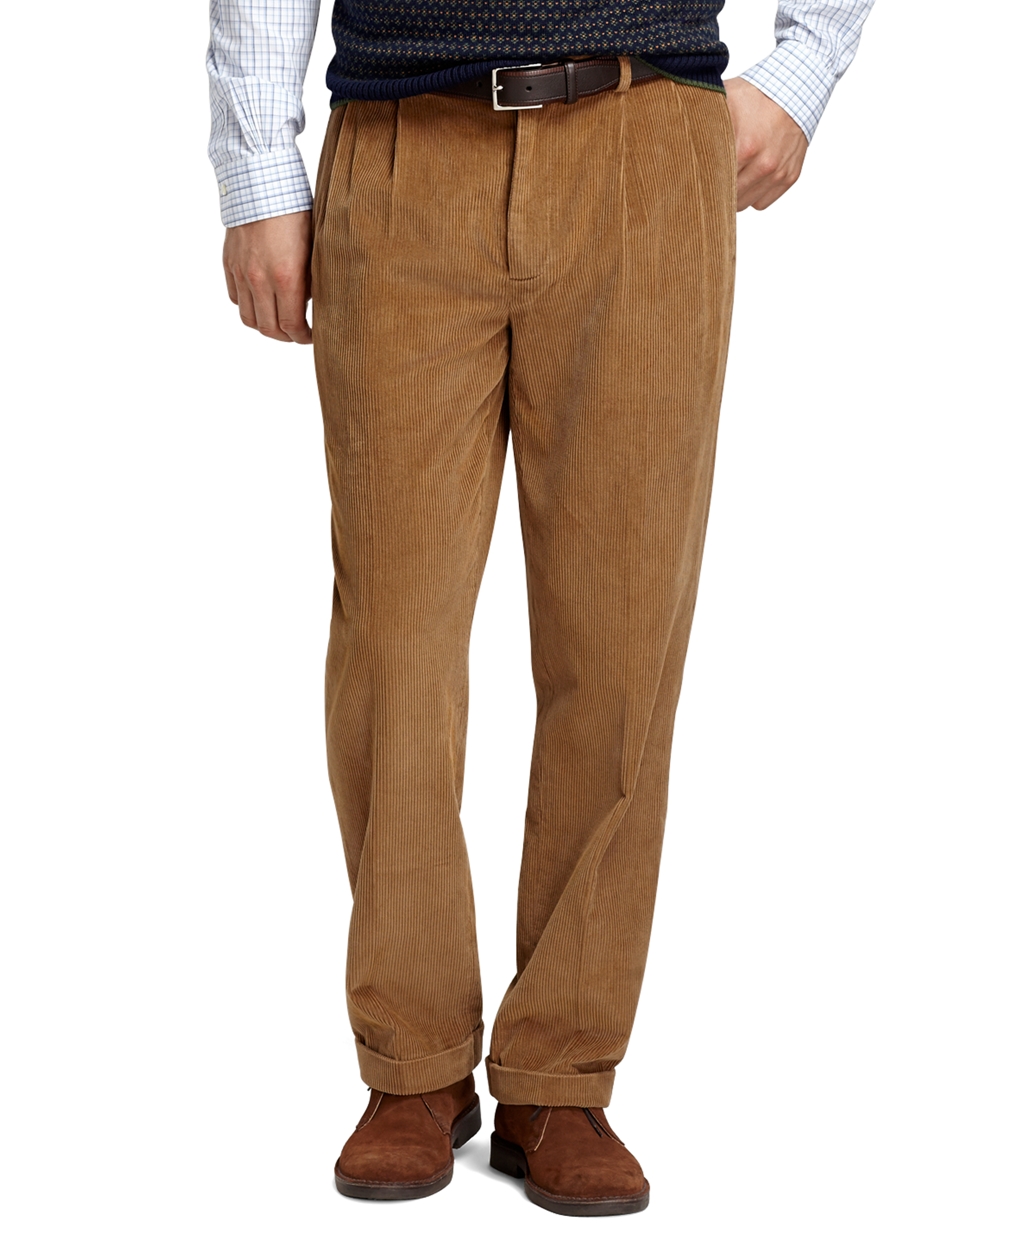 Brooks Brothers Elliot 8wale Corduroy Pants in Camel (Brown) for Men - Lyst